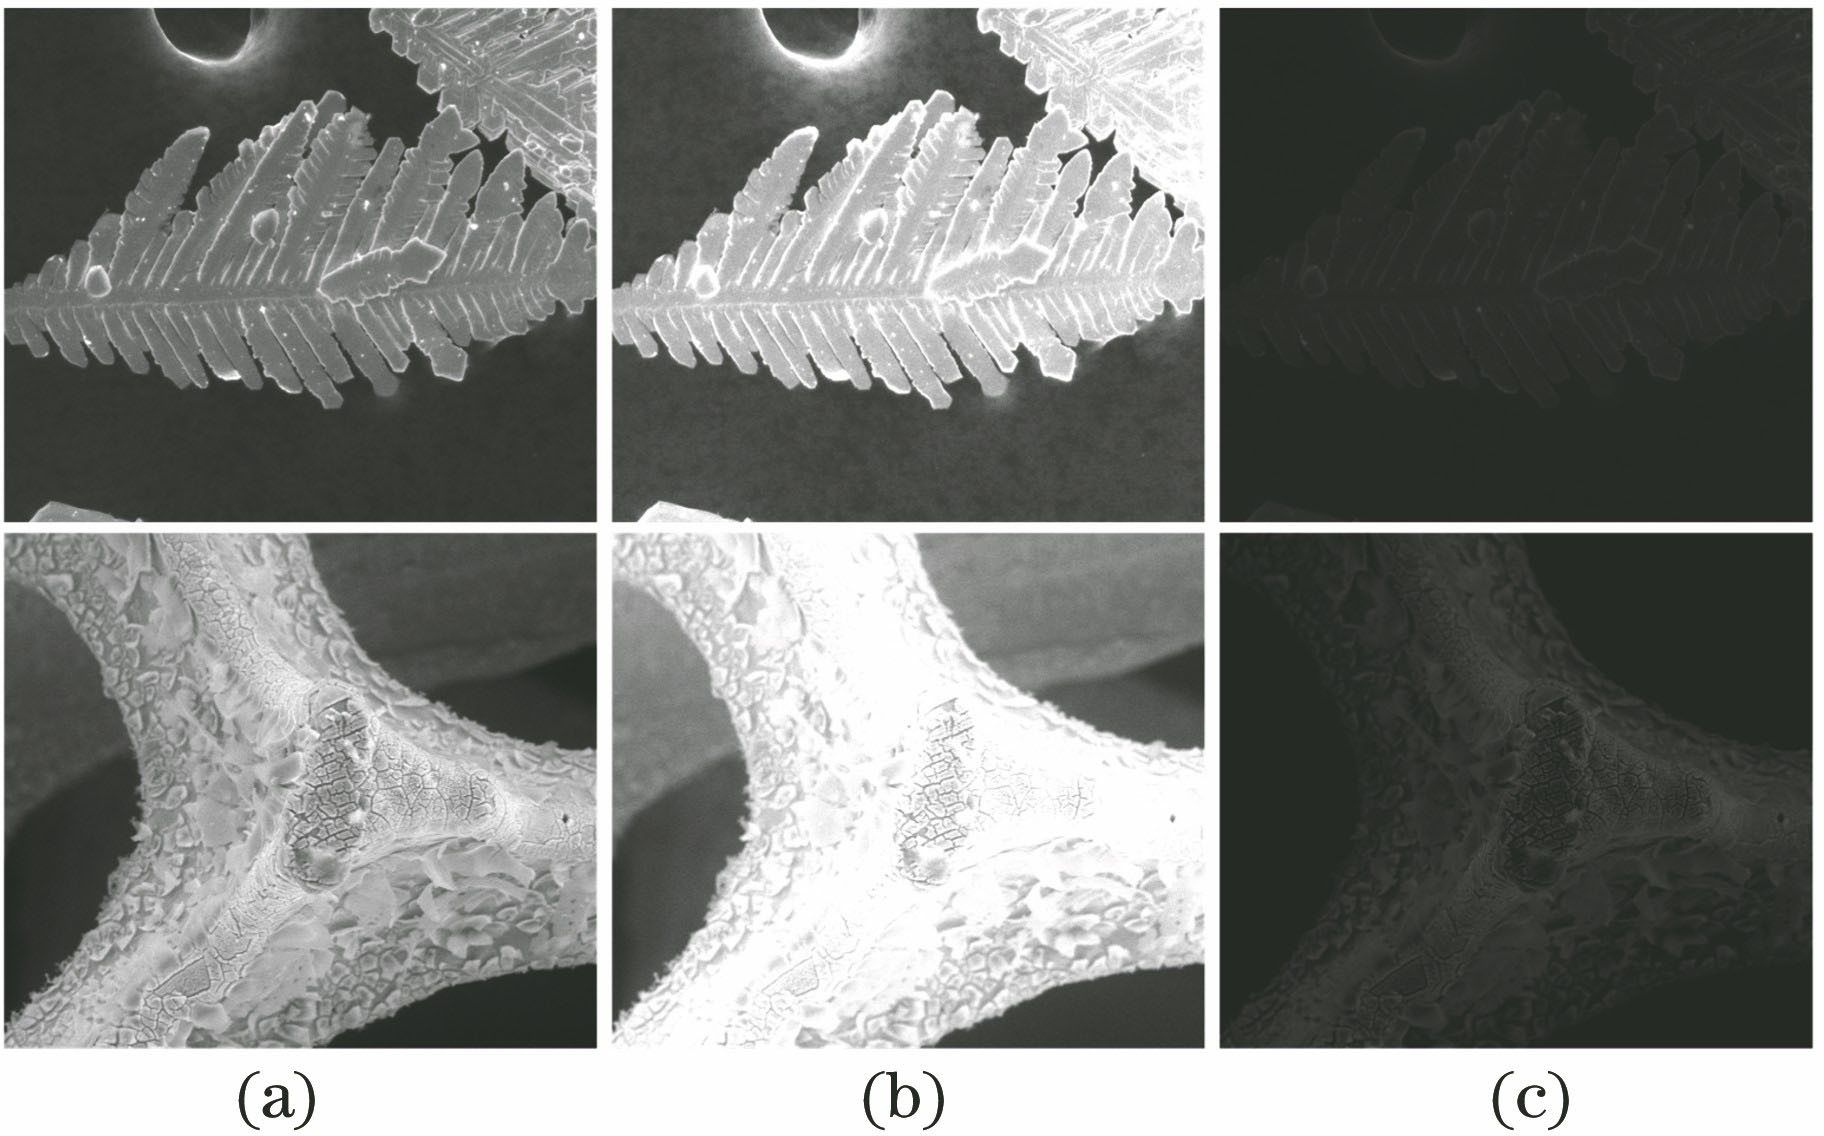 (a) Clear SEM images and (b)(c) corresponding contrast distortion images